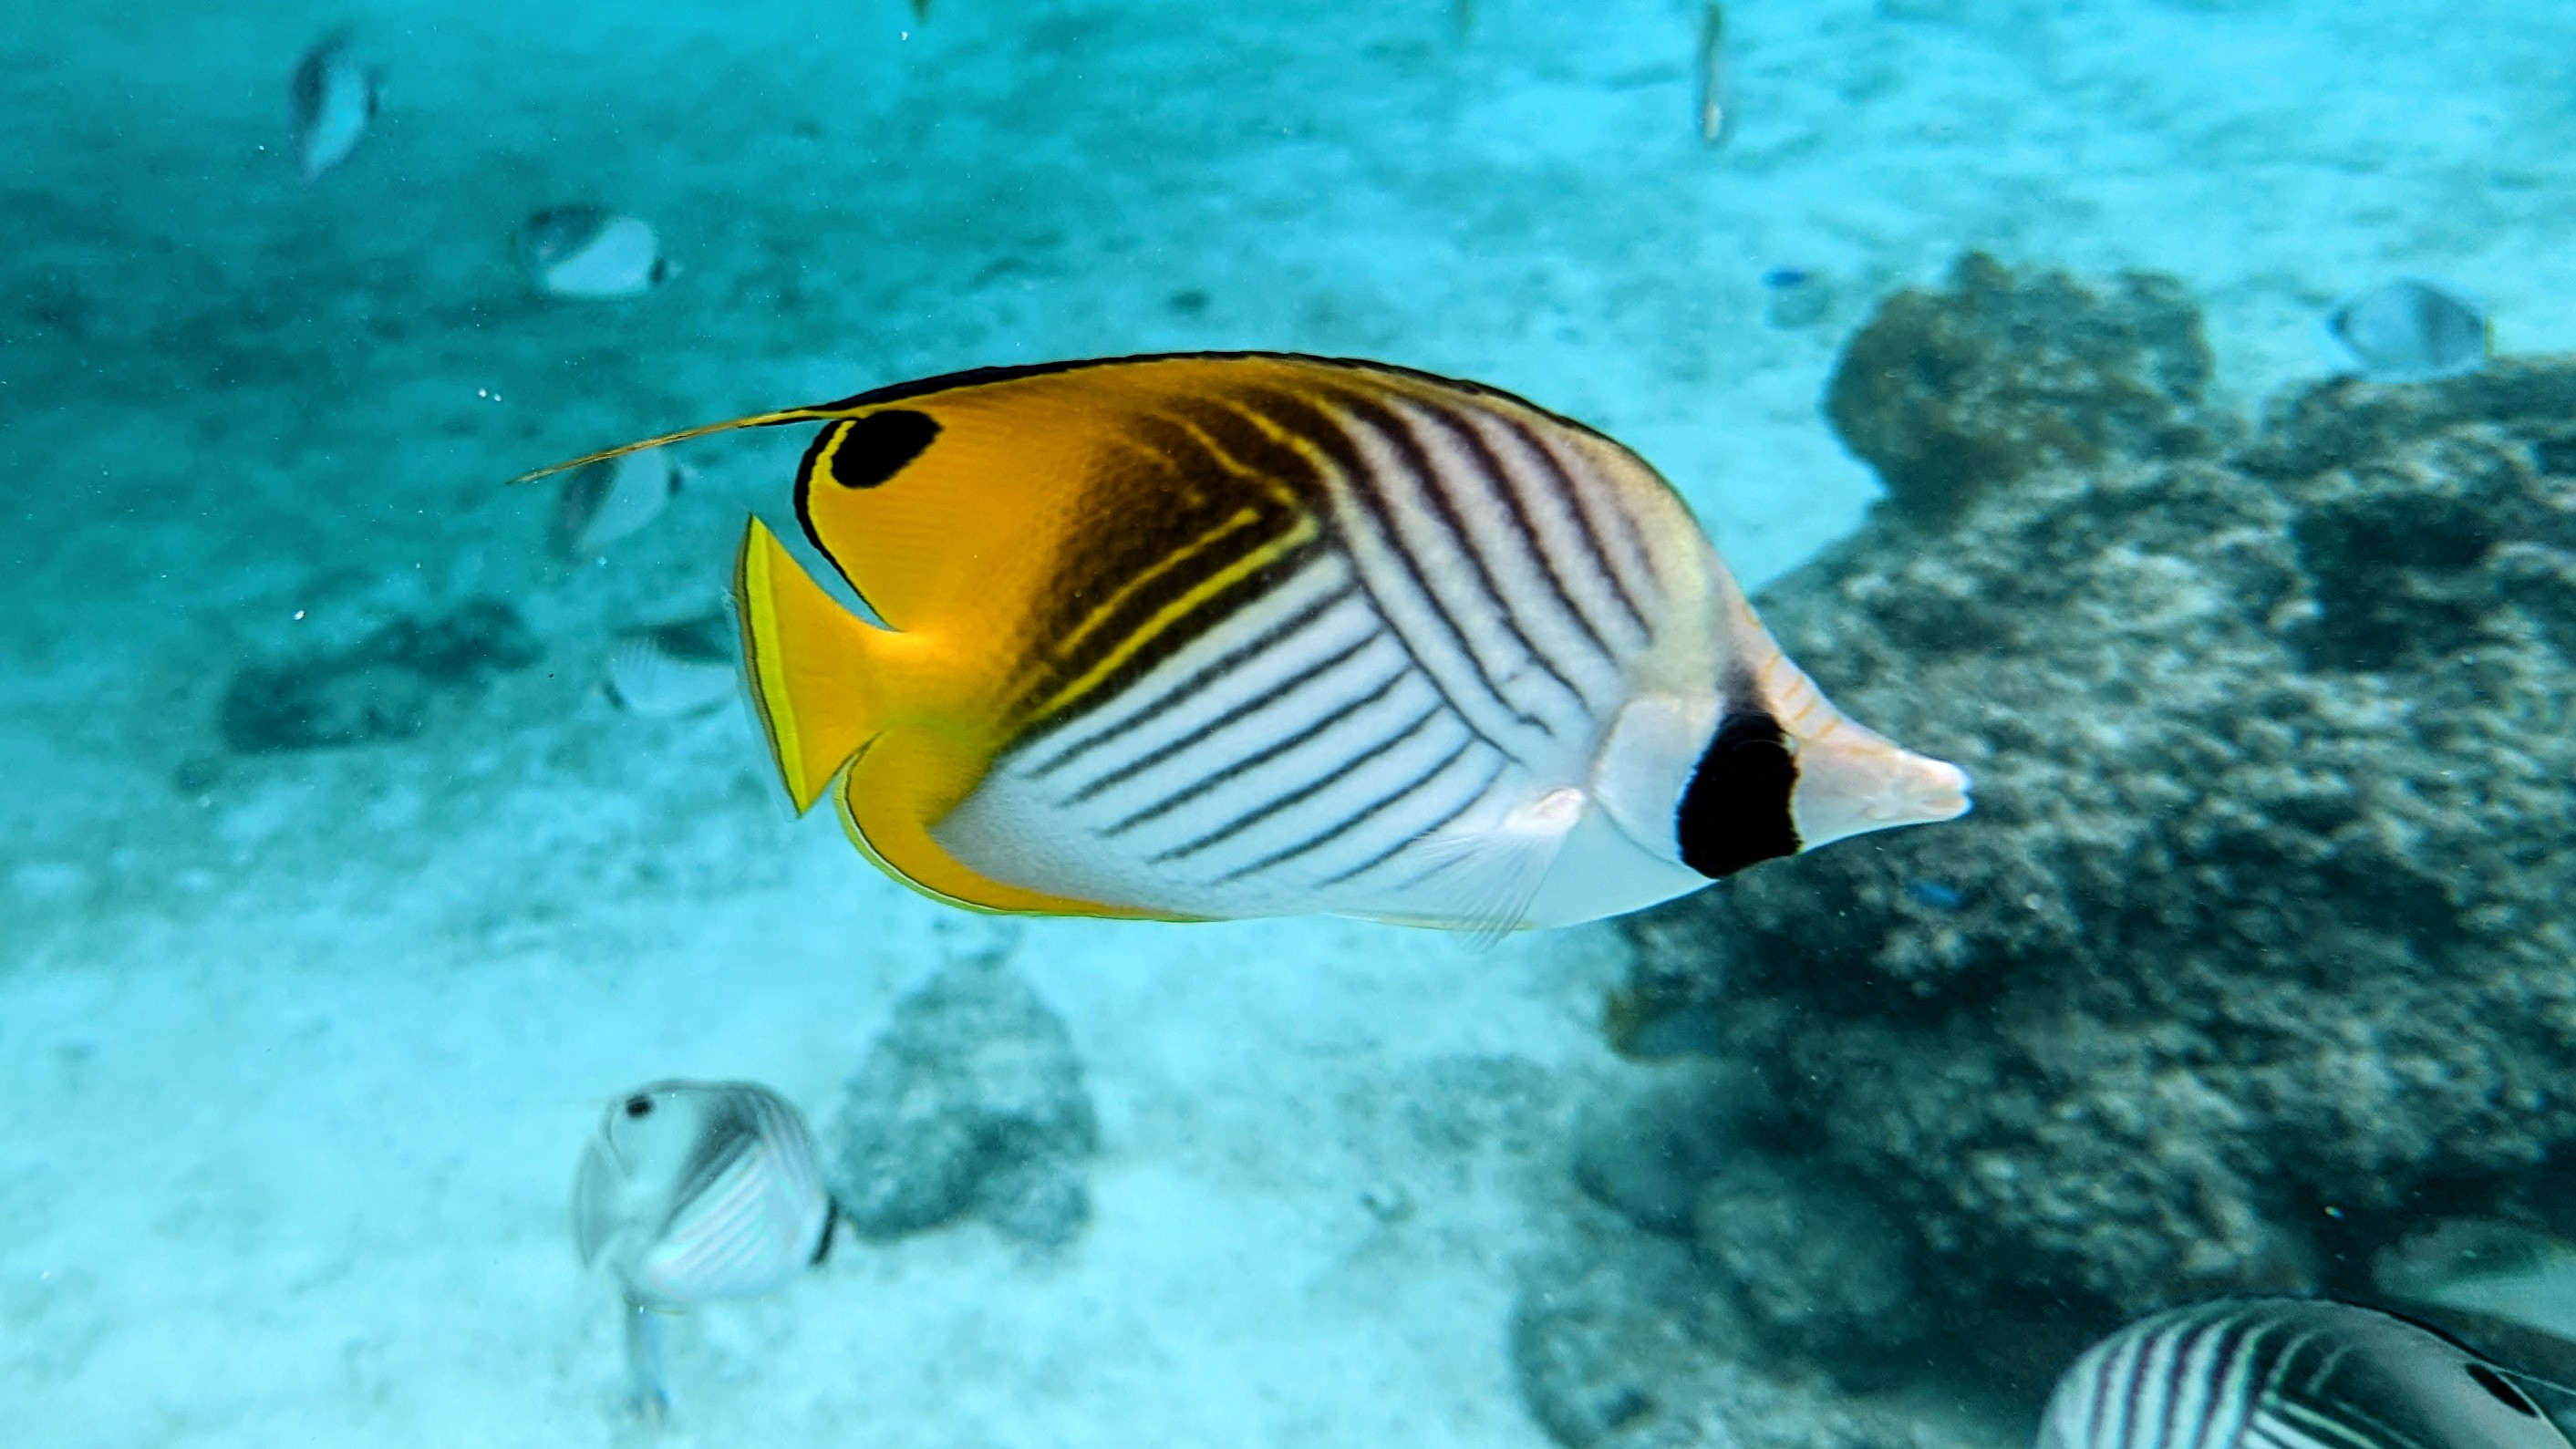 A Threadfin Butterfly fish swimming in a blue lagoon background